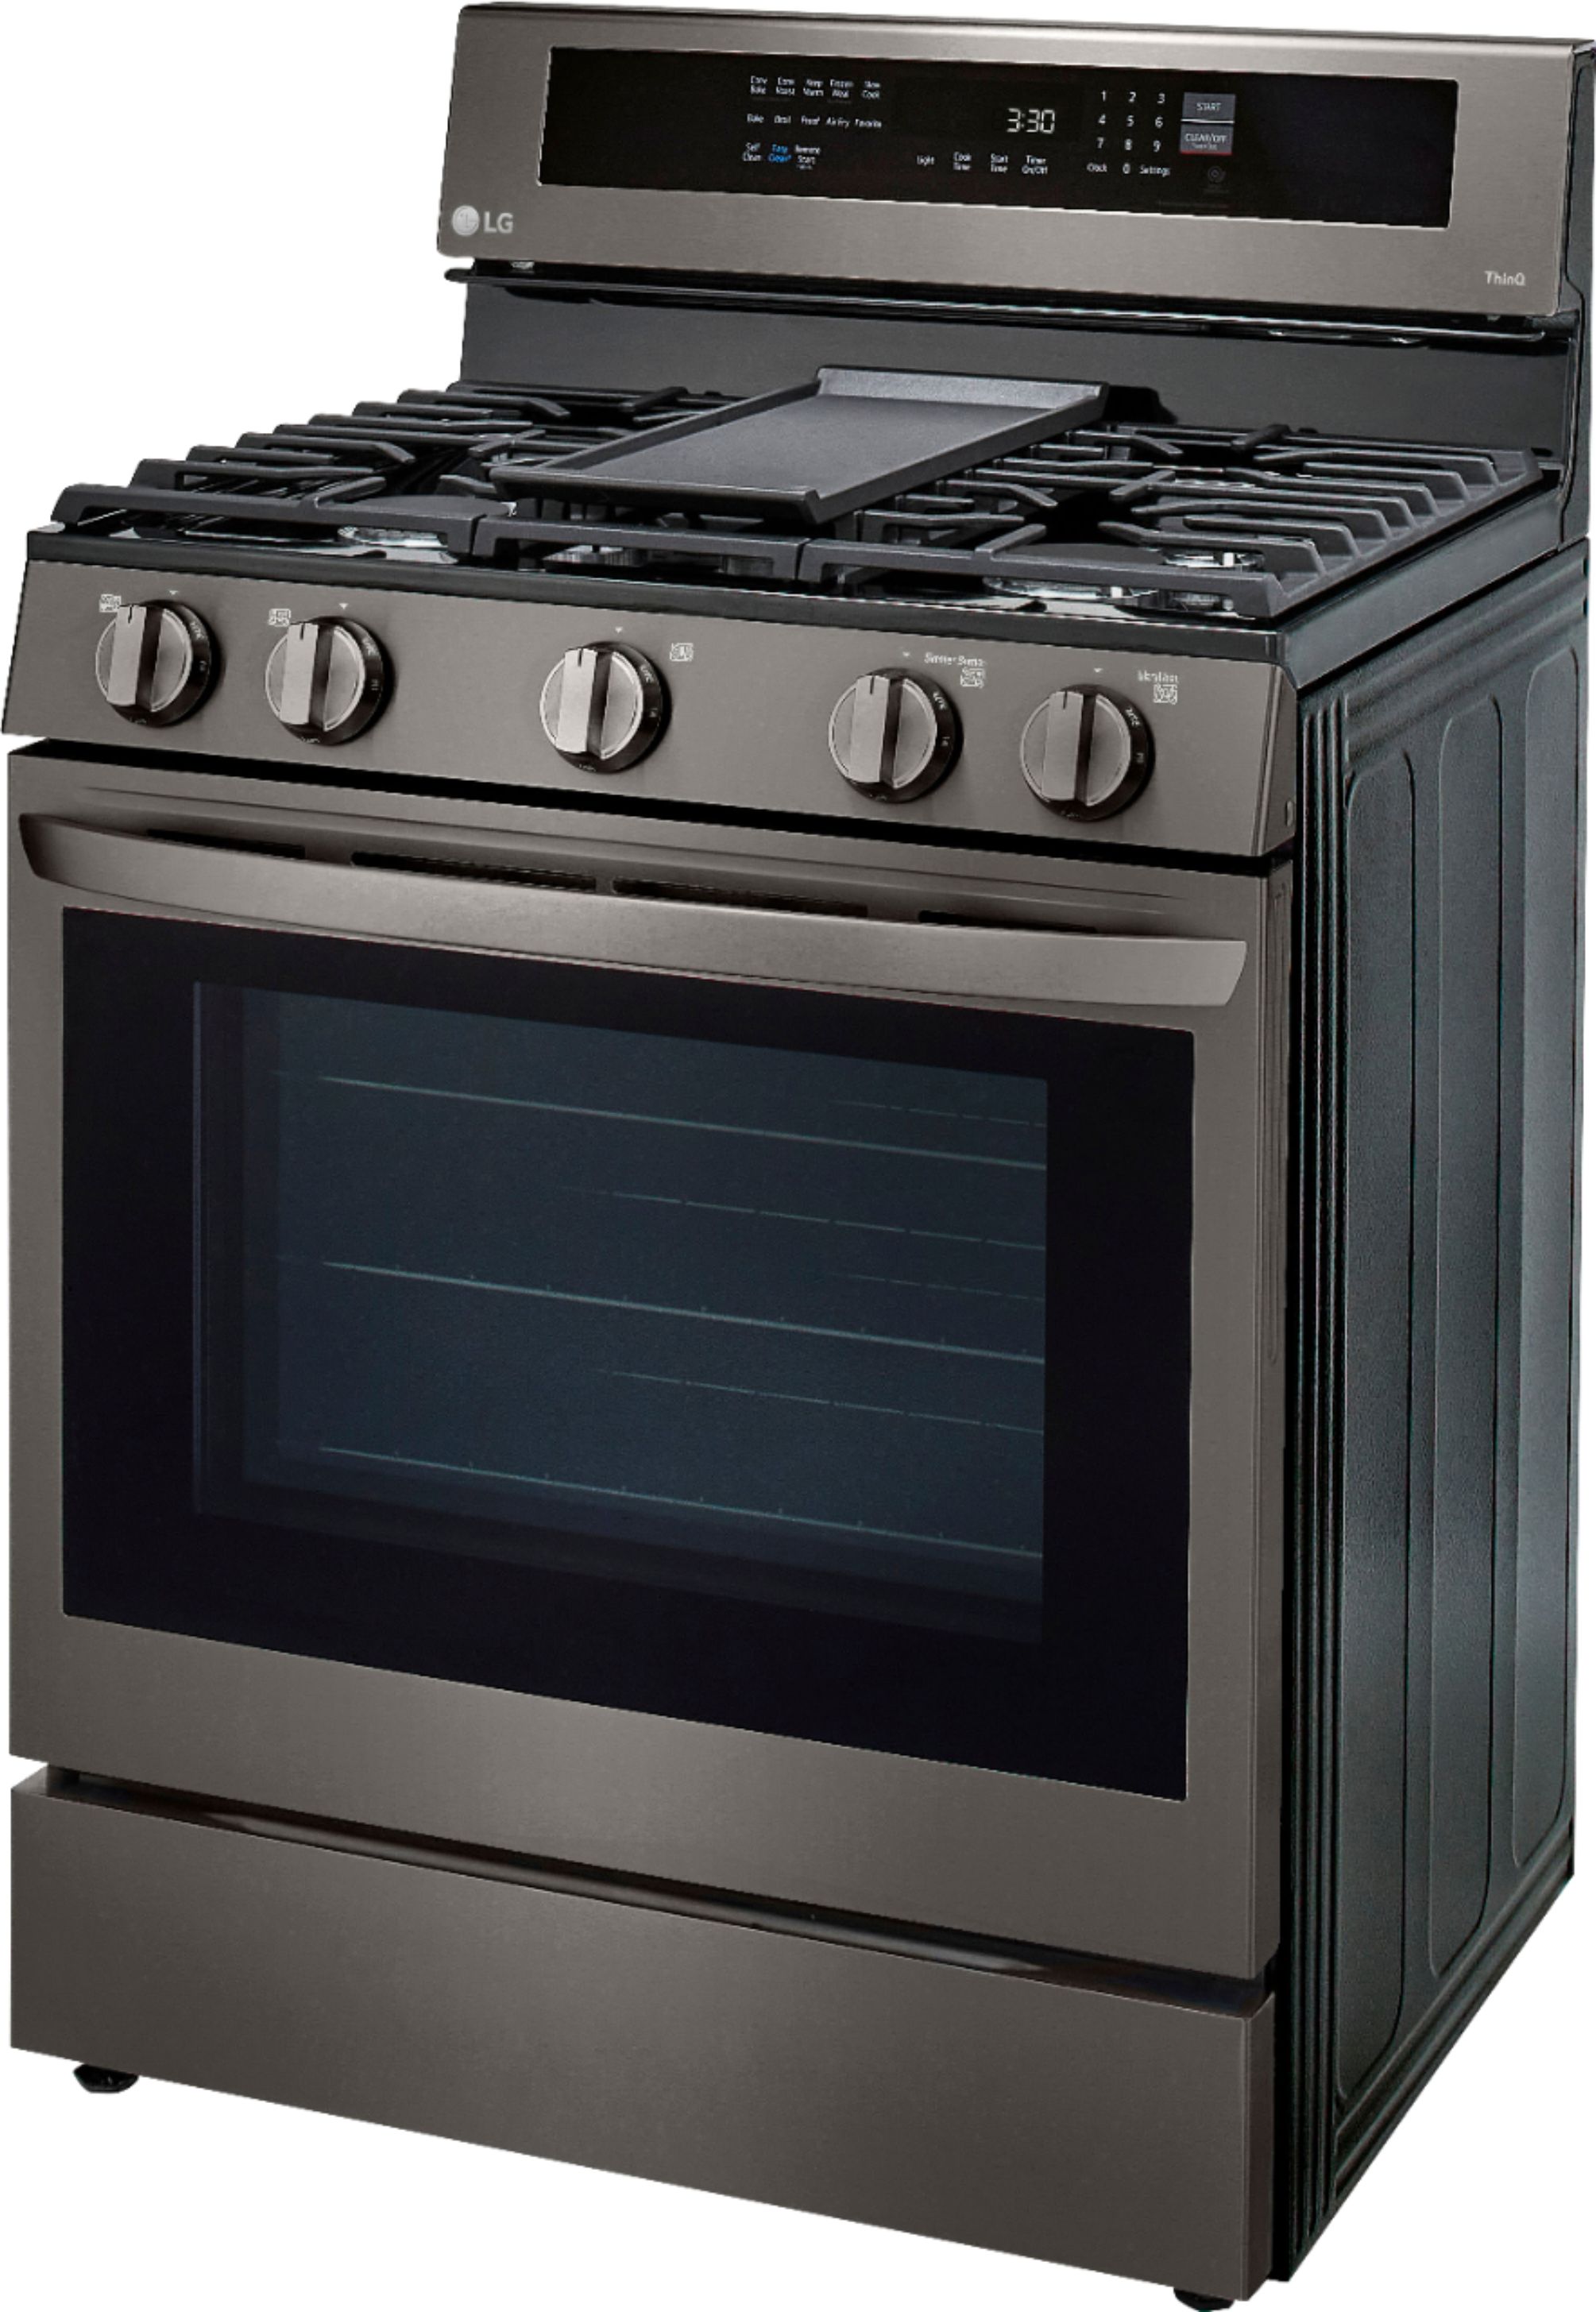 Angle View: GE - 5.6 Cu. Ft. Slide-In Gas Convection Range with Self-Steam Cleaning, Built-In Wi-Fi, and No-Preheat Air Fry - Black on black